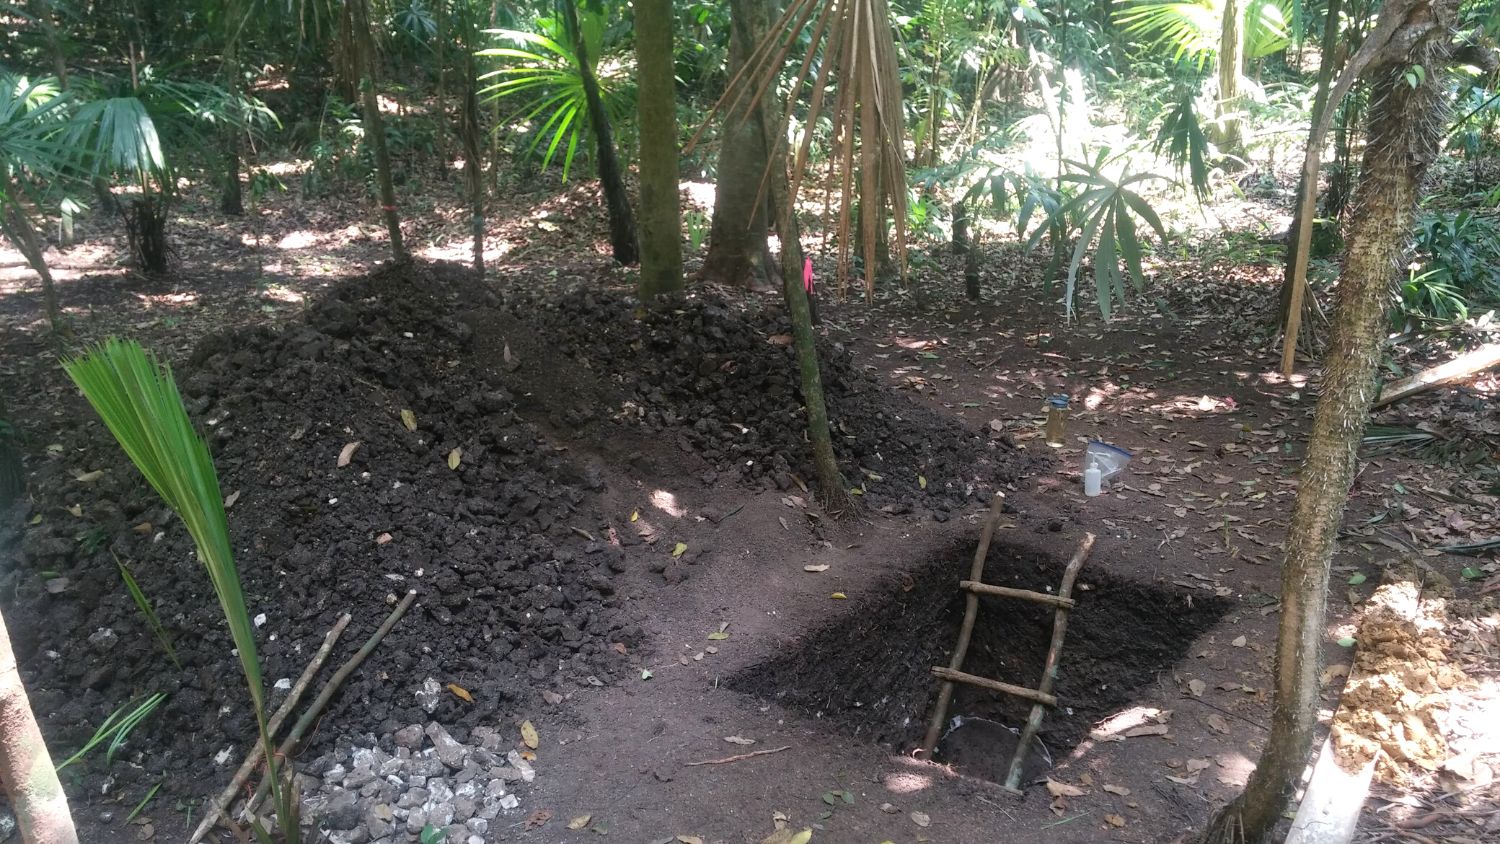 A soil transect site at the El-Peru Waka city